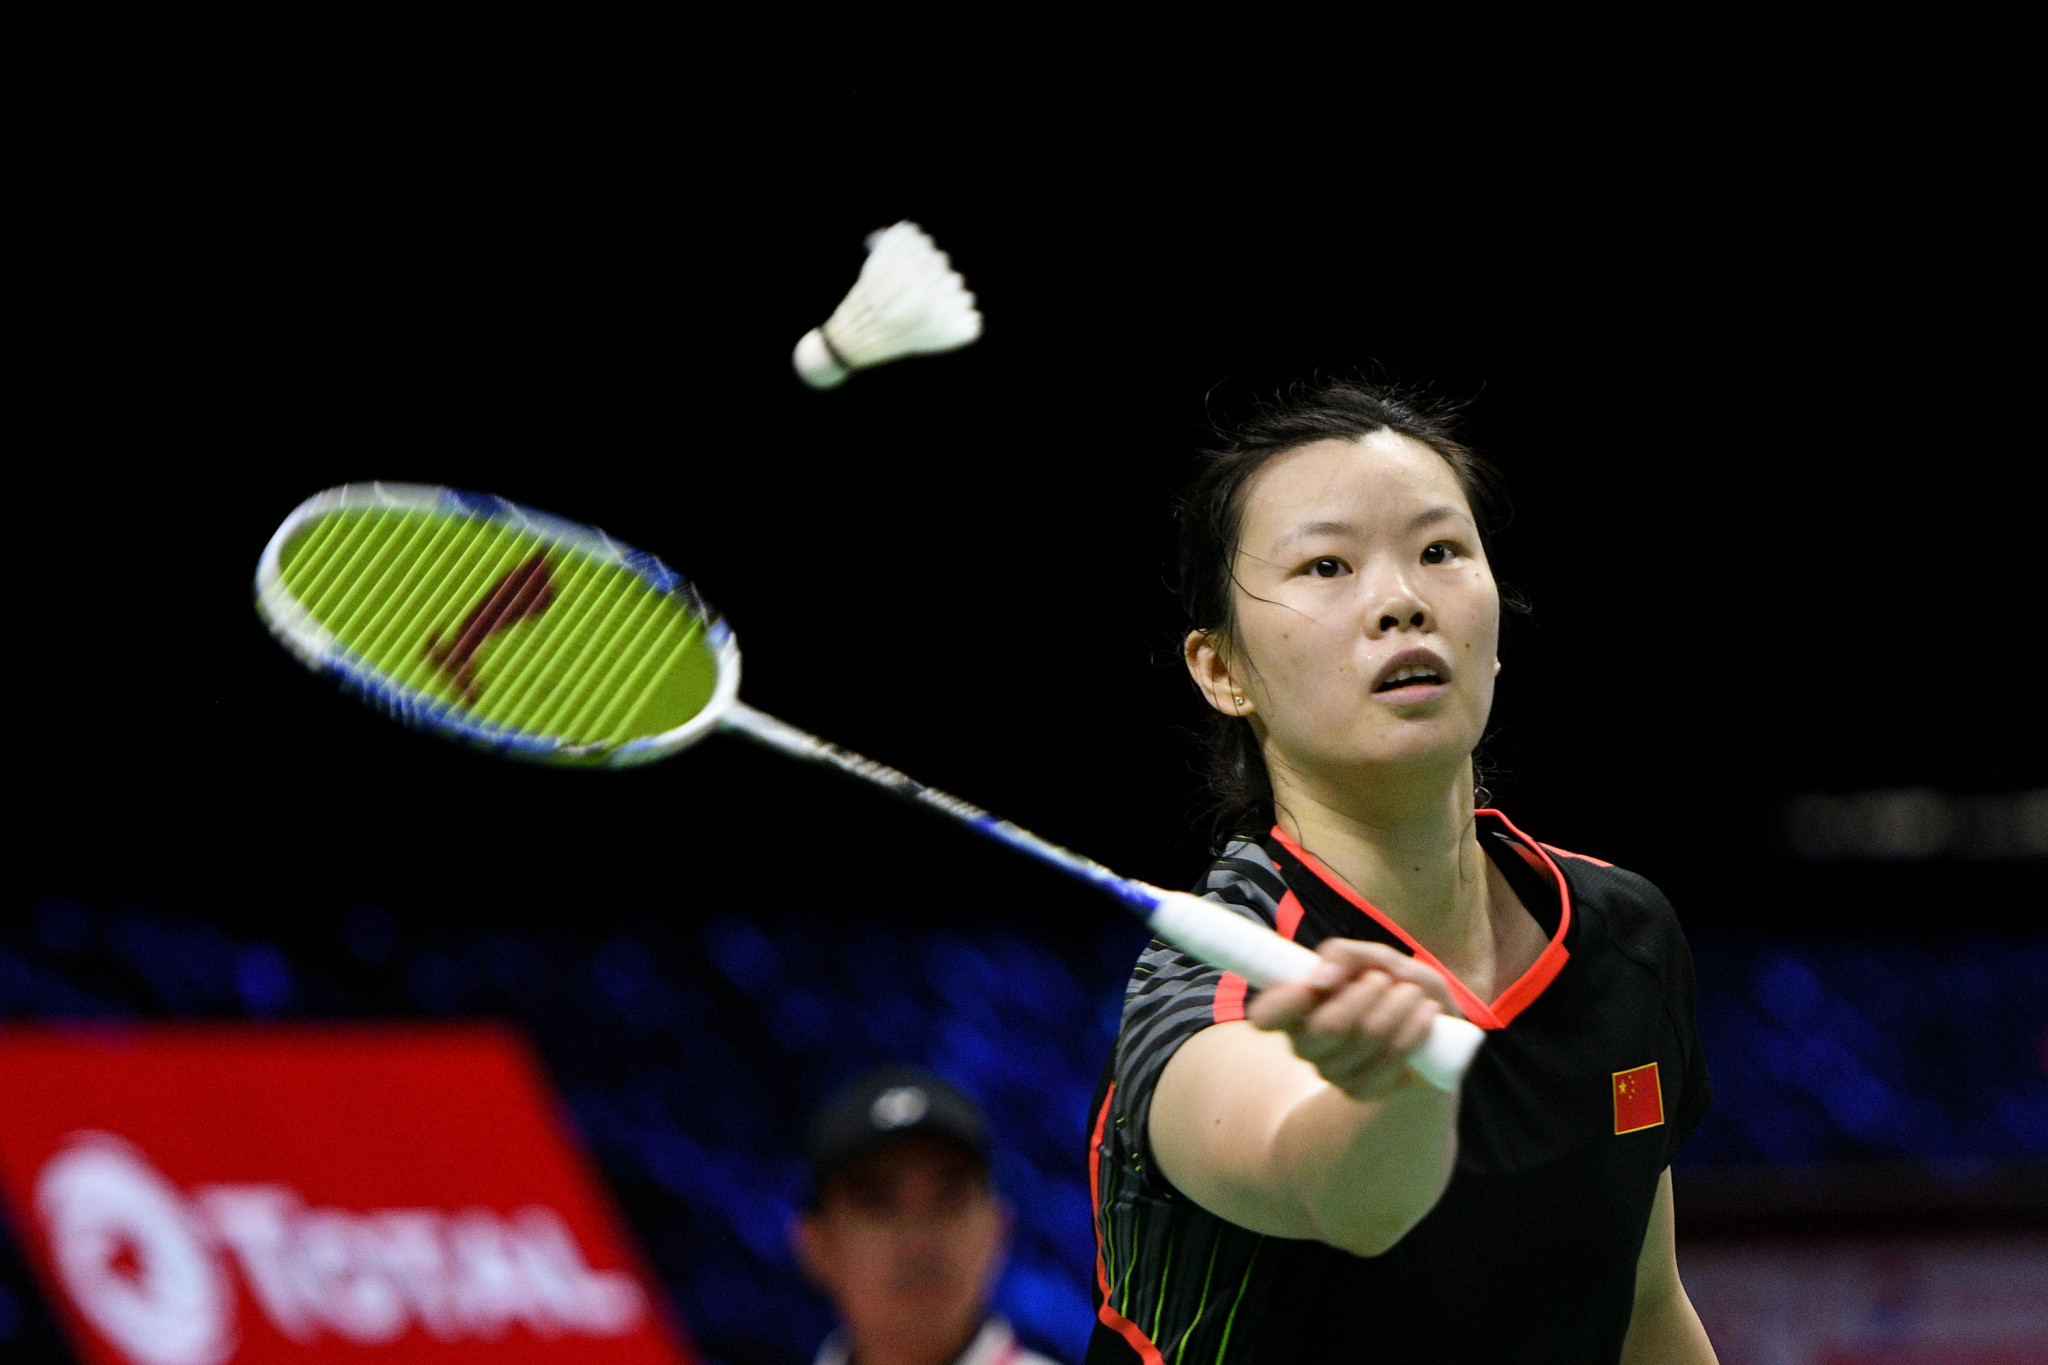 London 2012 champion continues march at BWF Canada Open